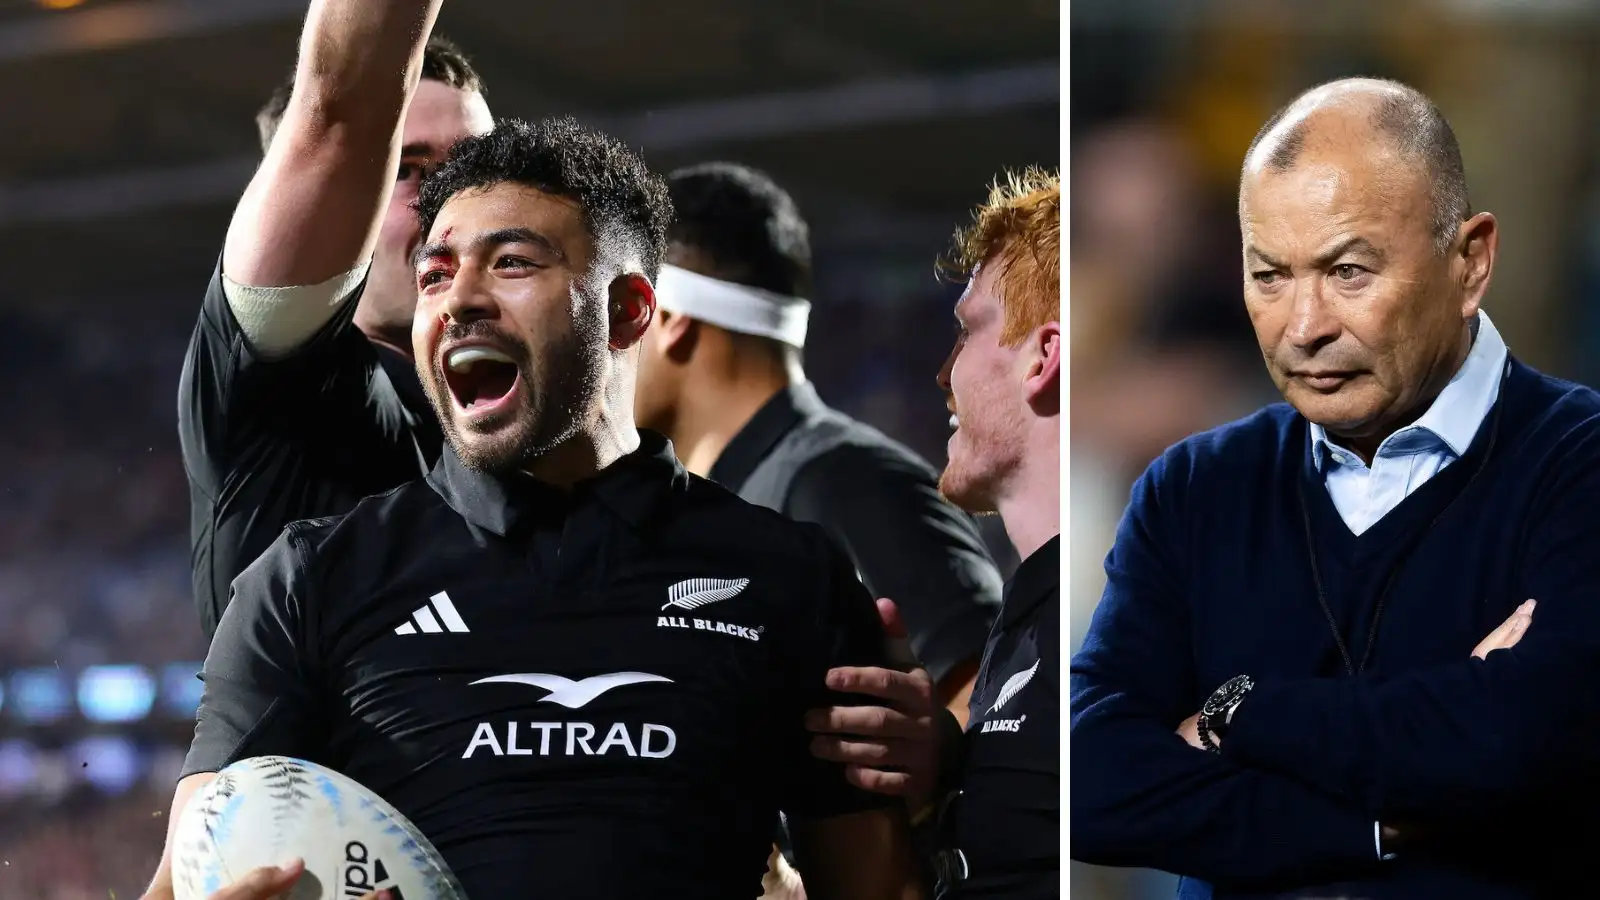 NZ All Blacks players ask men to check out their balls